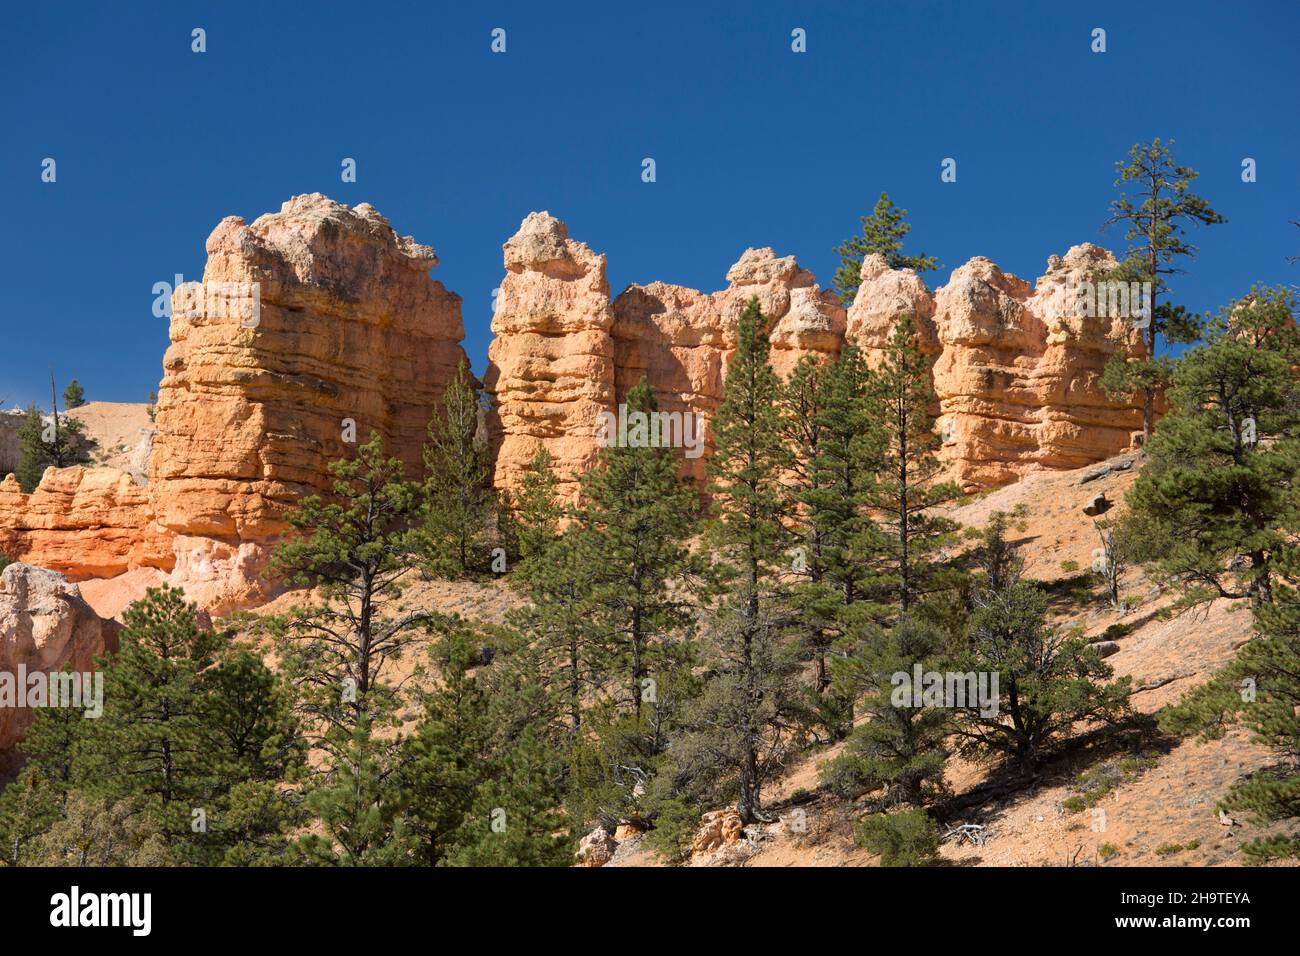 Bryce Canyon National Park, Utah, USA. View from the Mossy Cave Trail to typical sandstone hoodoos towering above Tropic Ditch in Water Canyon. Stock Photo